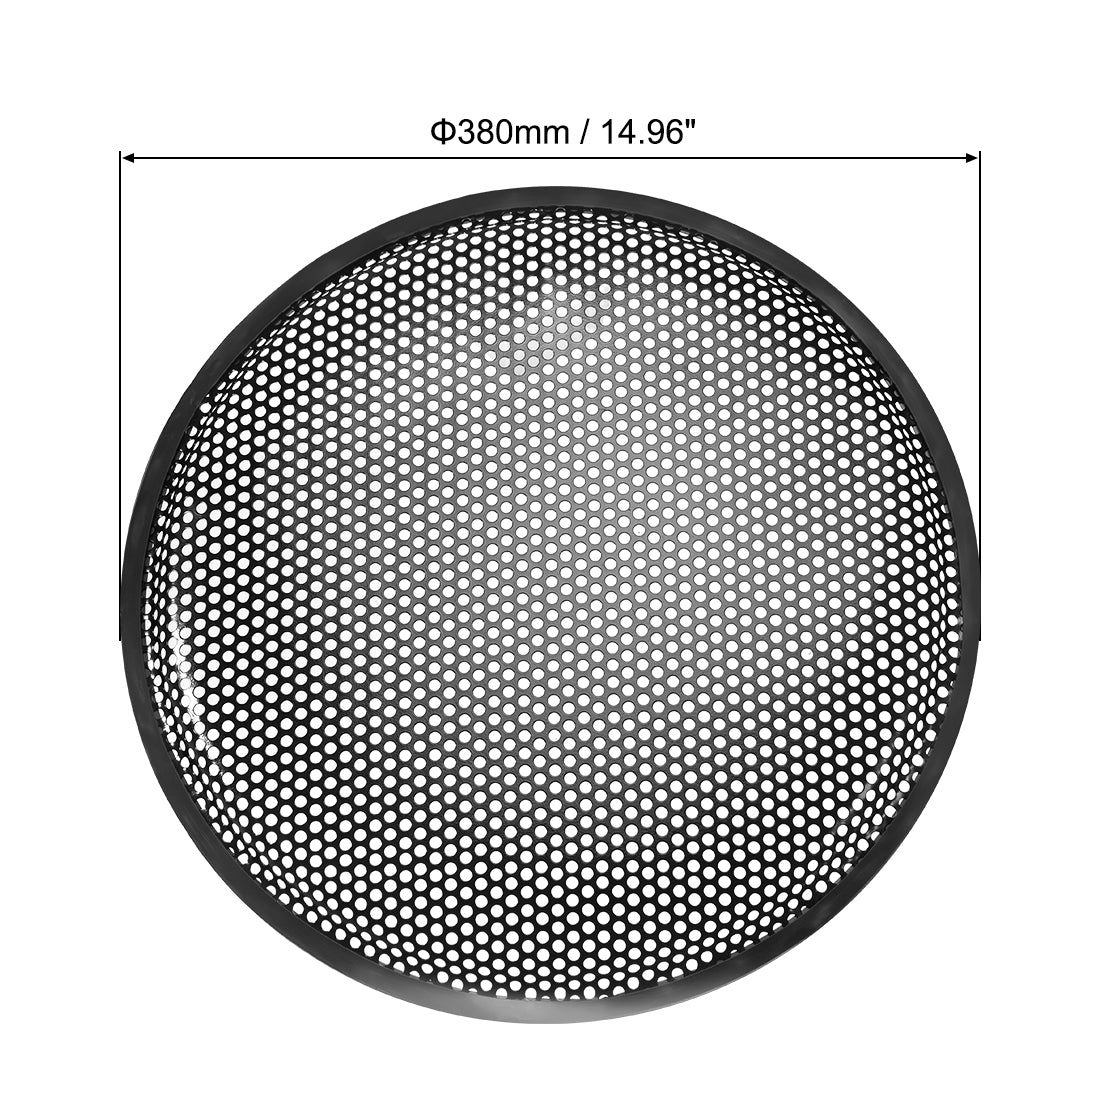 uxcell Uxcell 15" Speaker Waffle Grill Metal Mesh Audio Subwoofer Guard Protector Cover with Clips,Screws